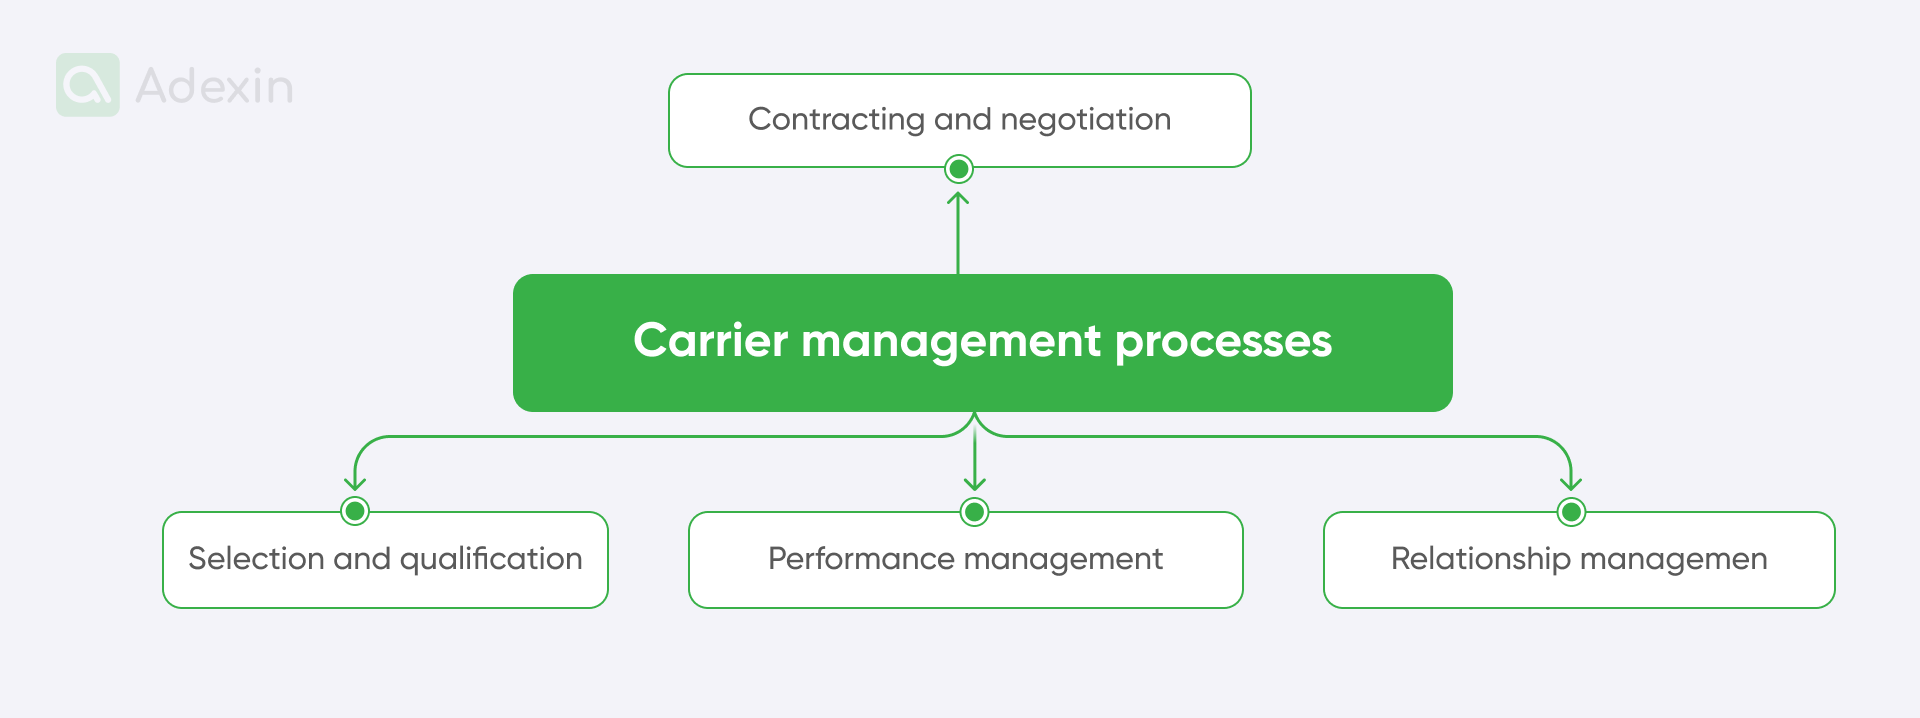 Basics of the carrier management process